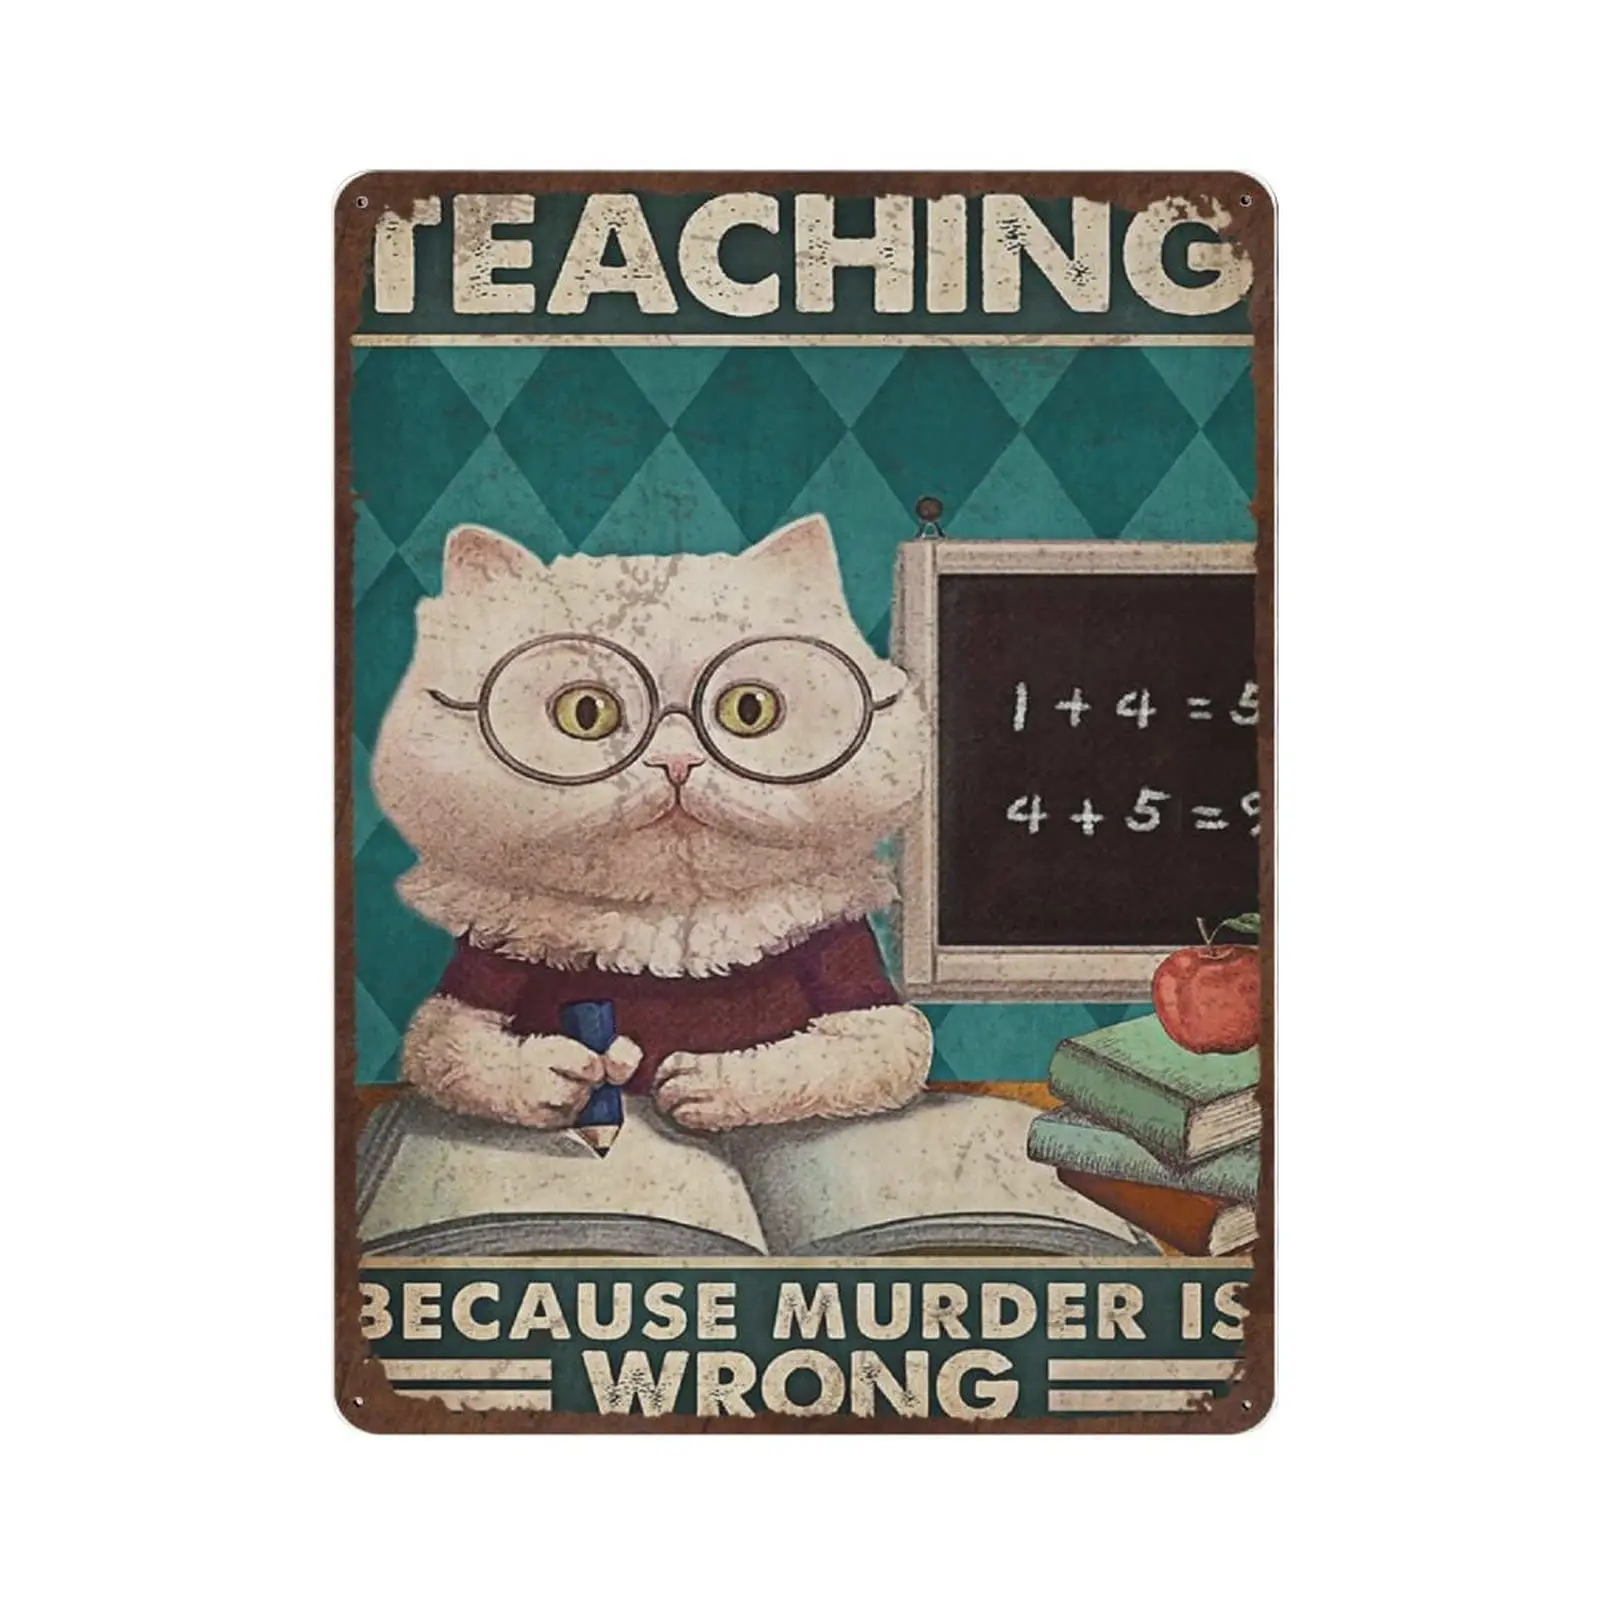 

Antique Durable Thick Metal Sign,Teacher Teaching Cat Tin Sign - Poster for Cat Lover, Teaching Because Murder is Wrong,Novelty